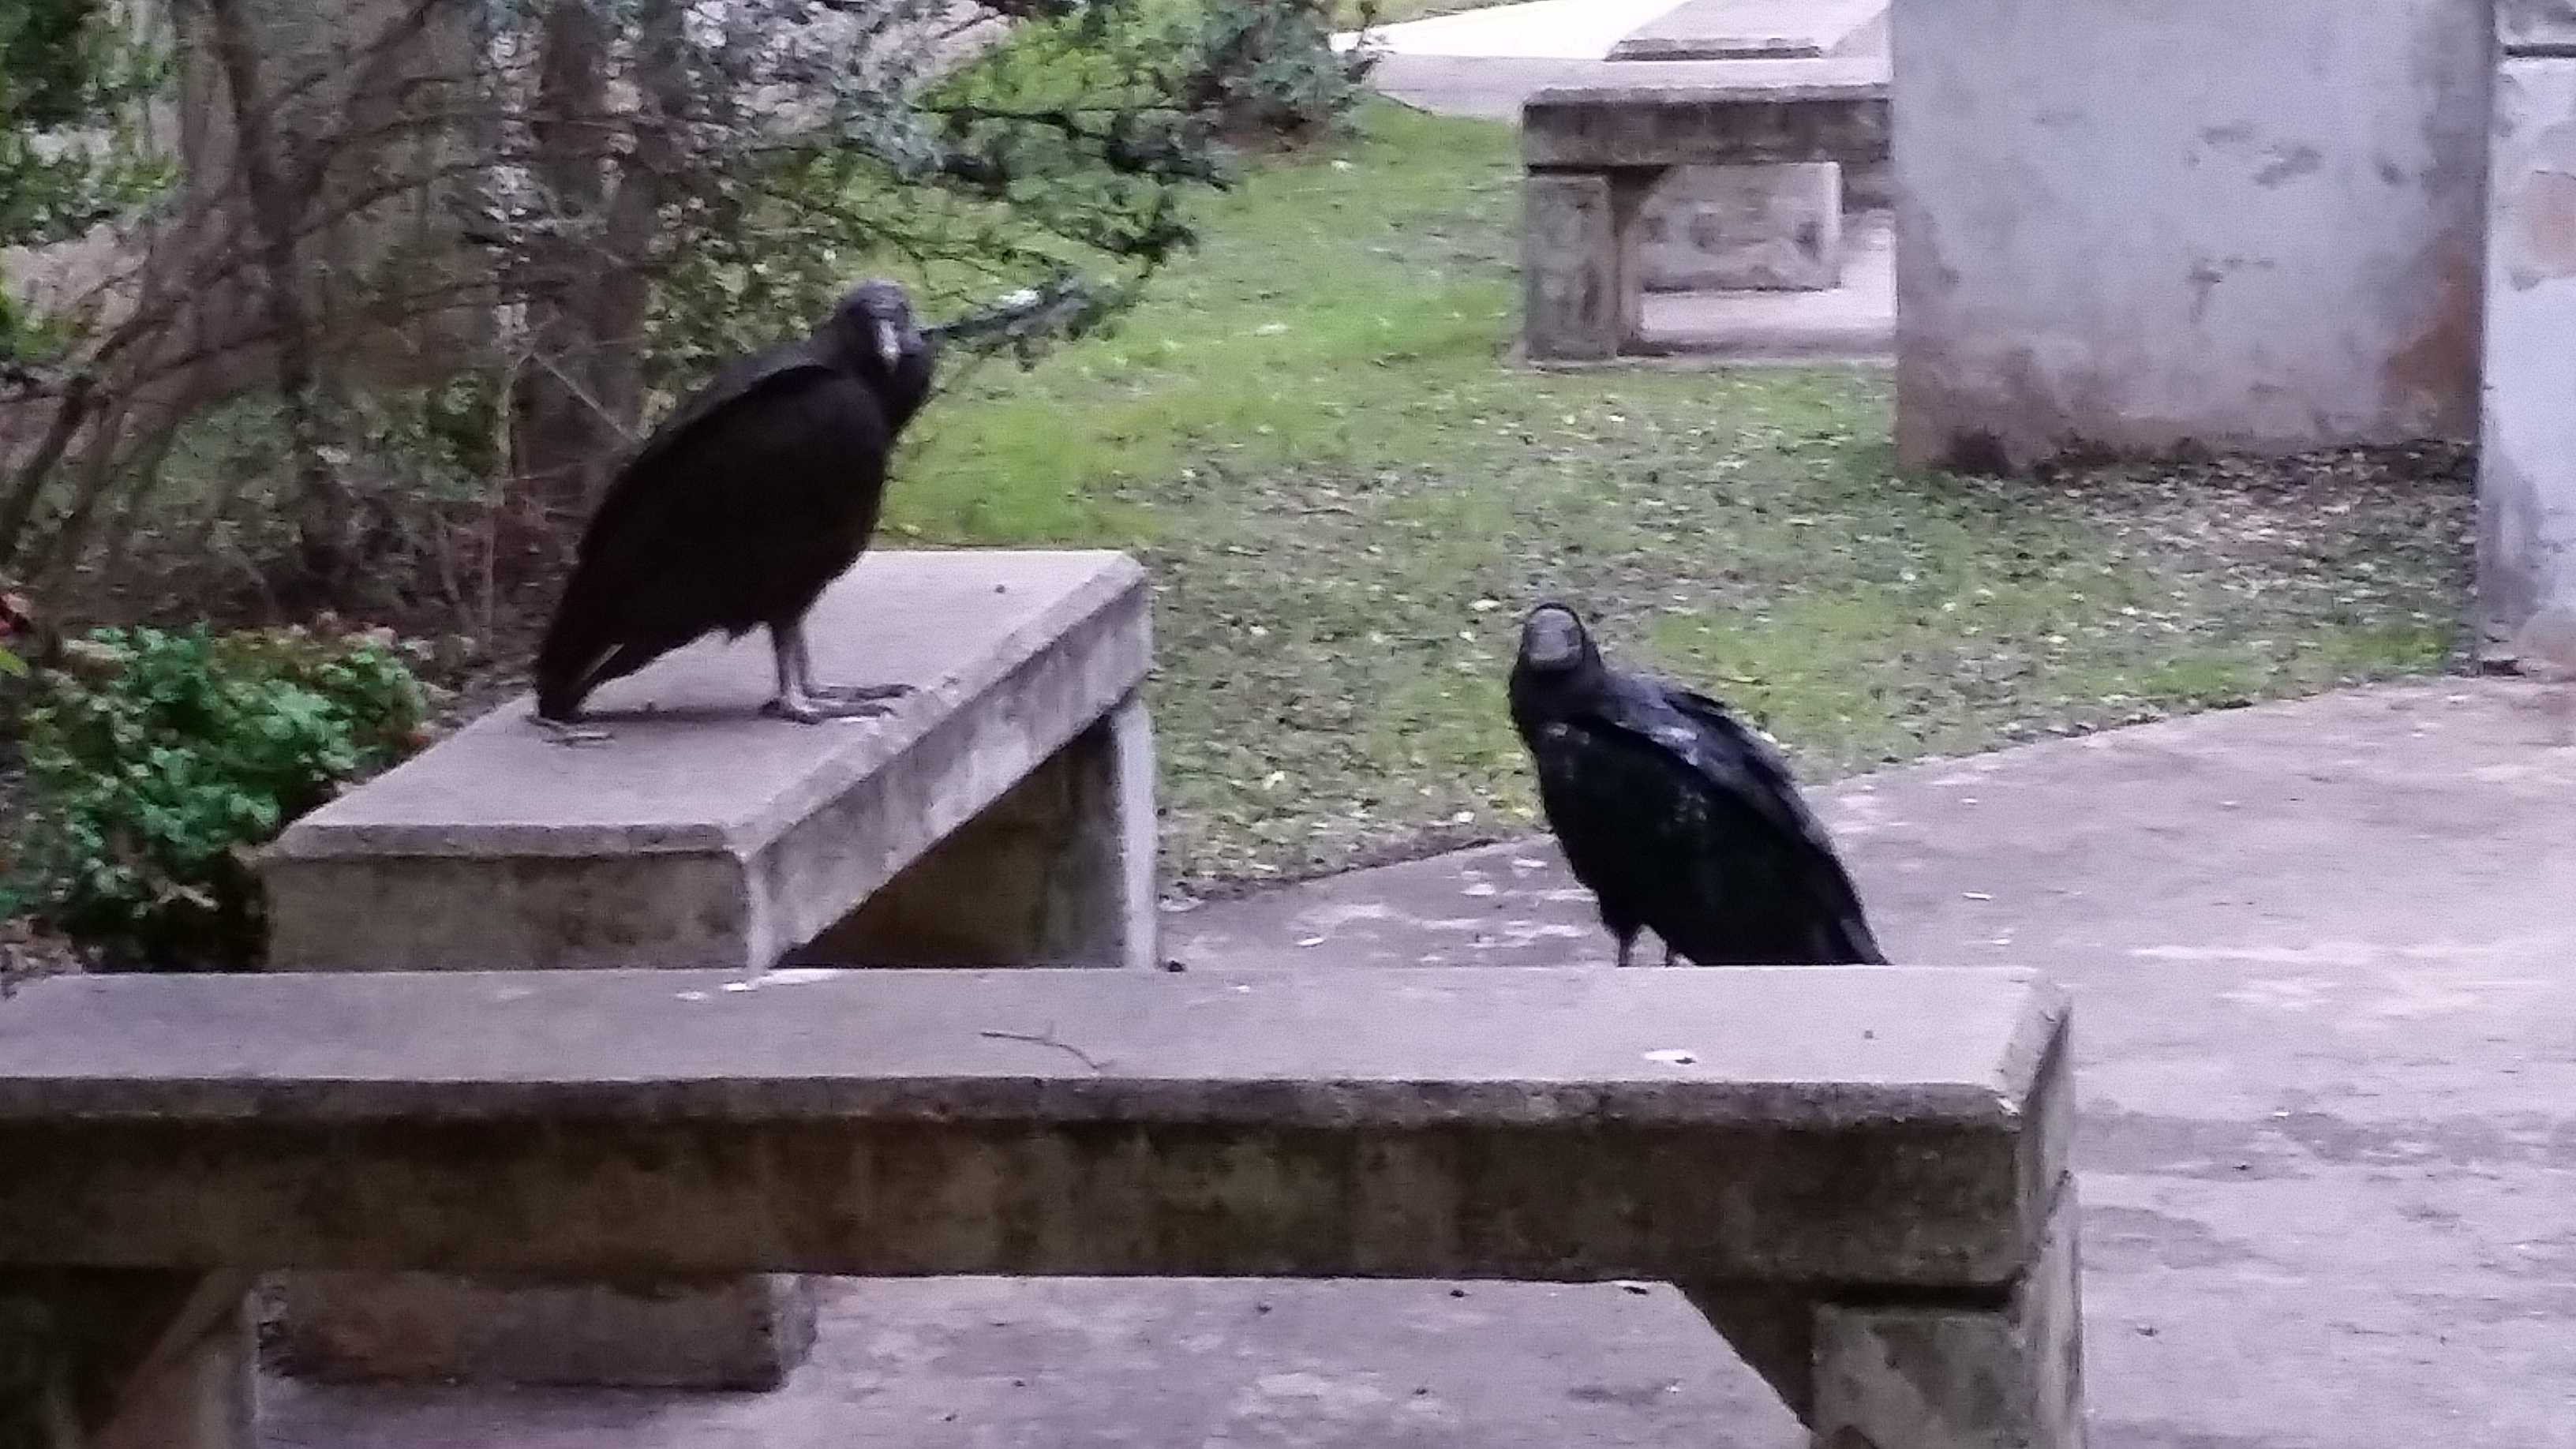 Vulture+Couple+Makes+Home+in+Courtyard